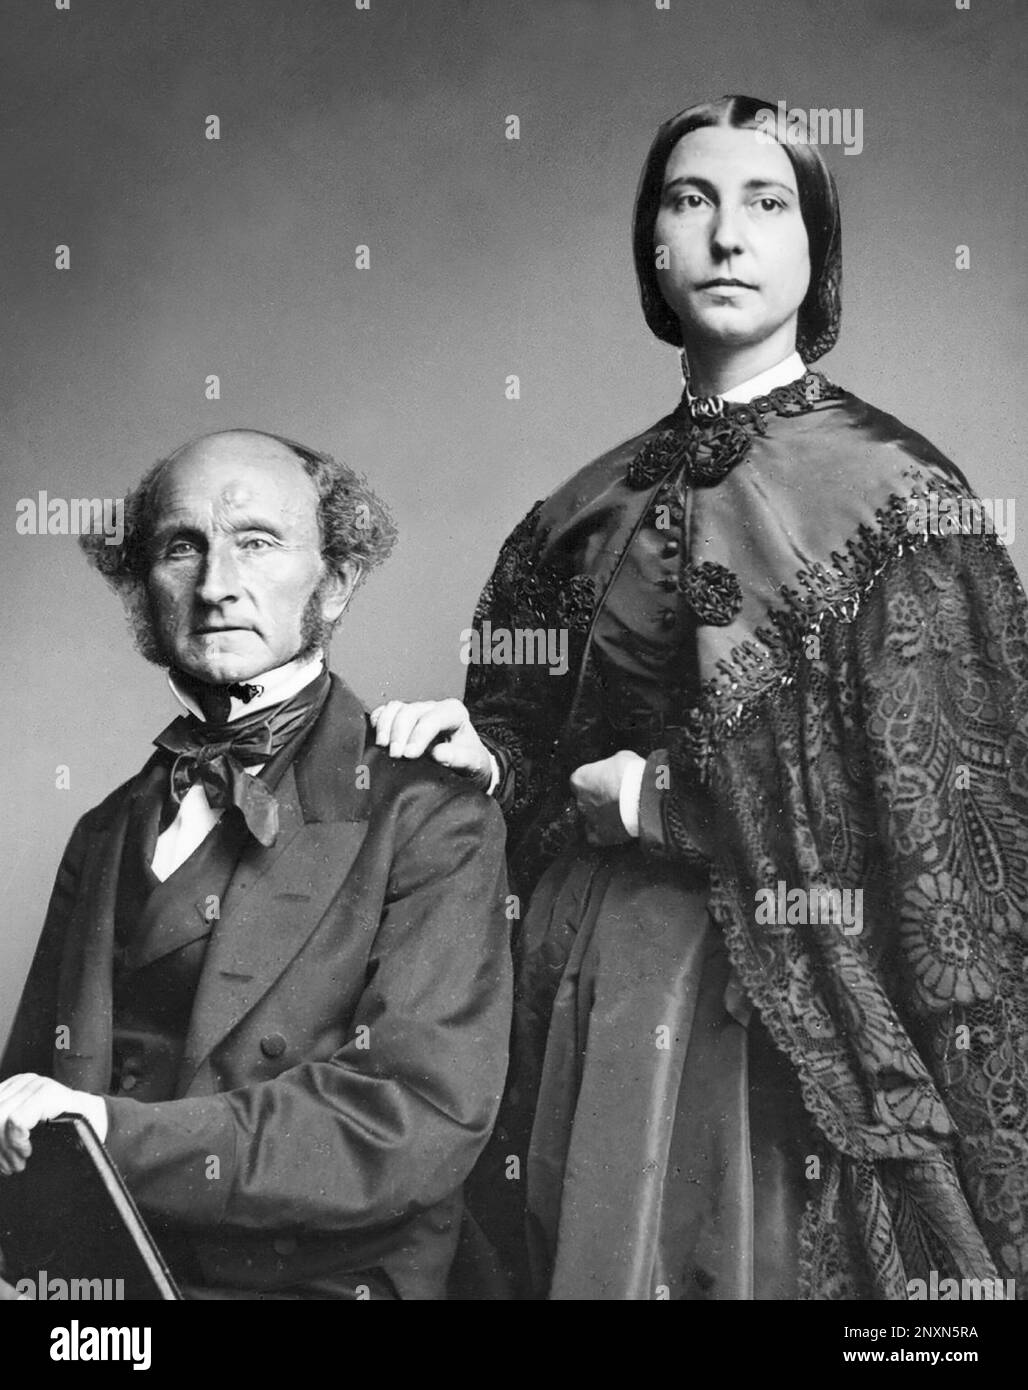 John Stuart Mill (1806-1873) was an English philosopher, political economist, Member of Parliament and civil servant. Helen Taylor (1831-1907) was an English feminist, writer, actress, and stepdaughter of John Stuart Mill. After the death of her mother she worked with Mill promoting women's rights. Stock Photo